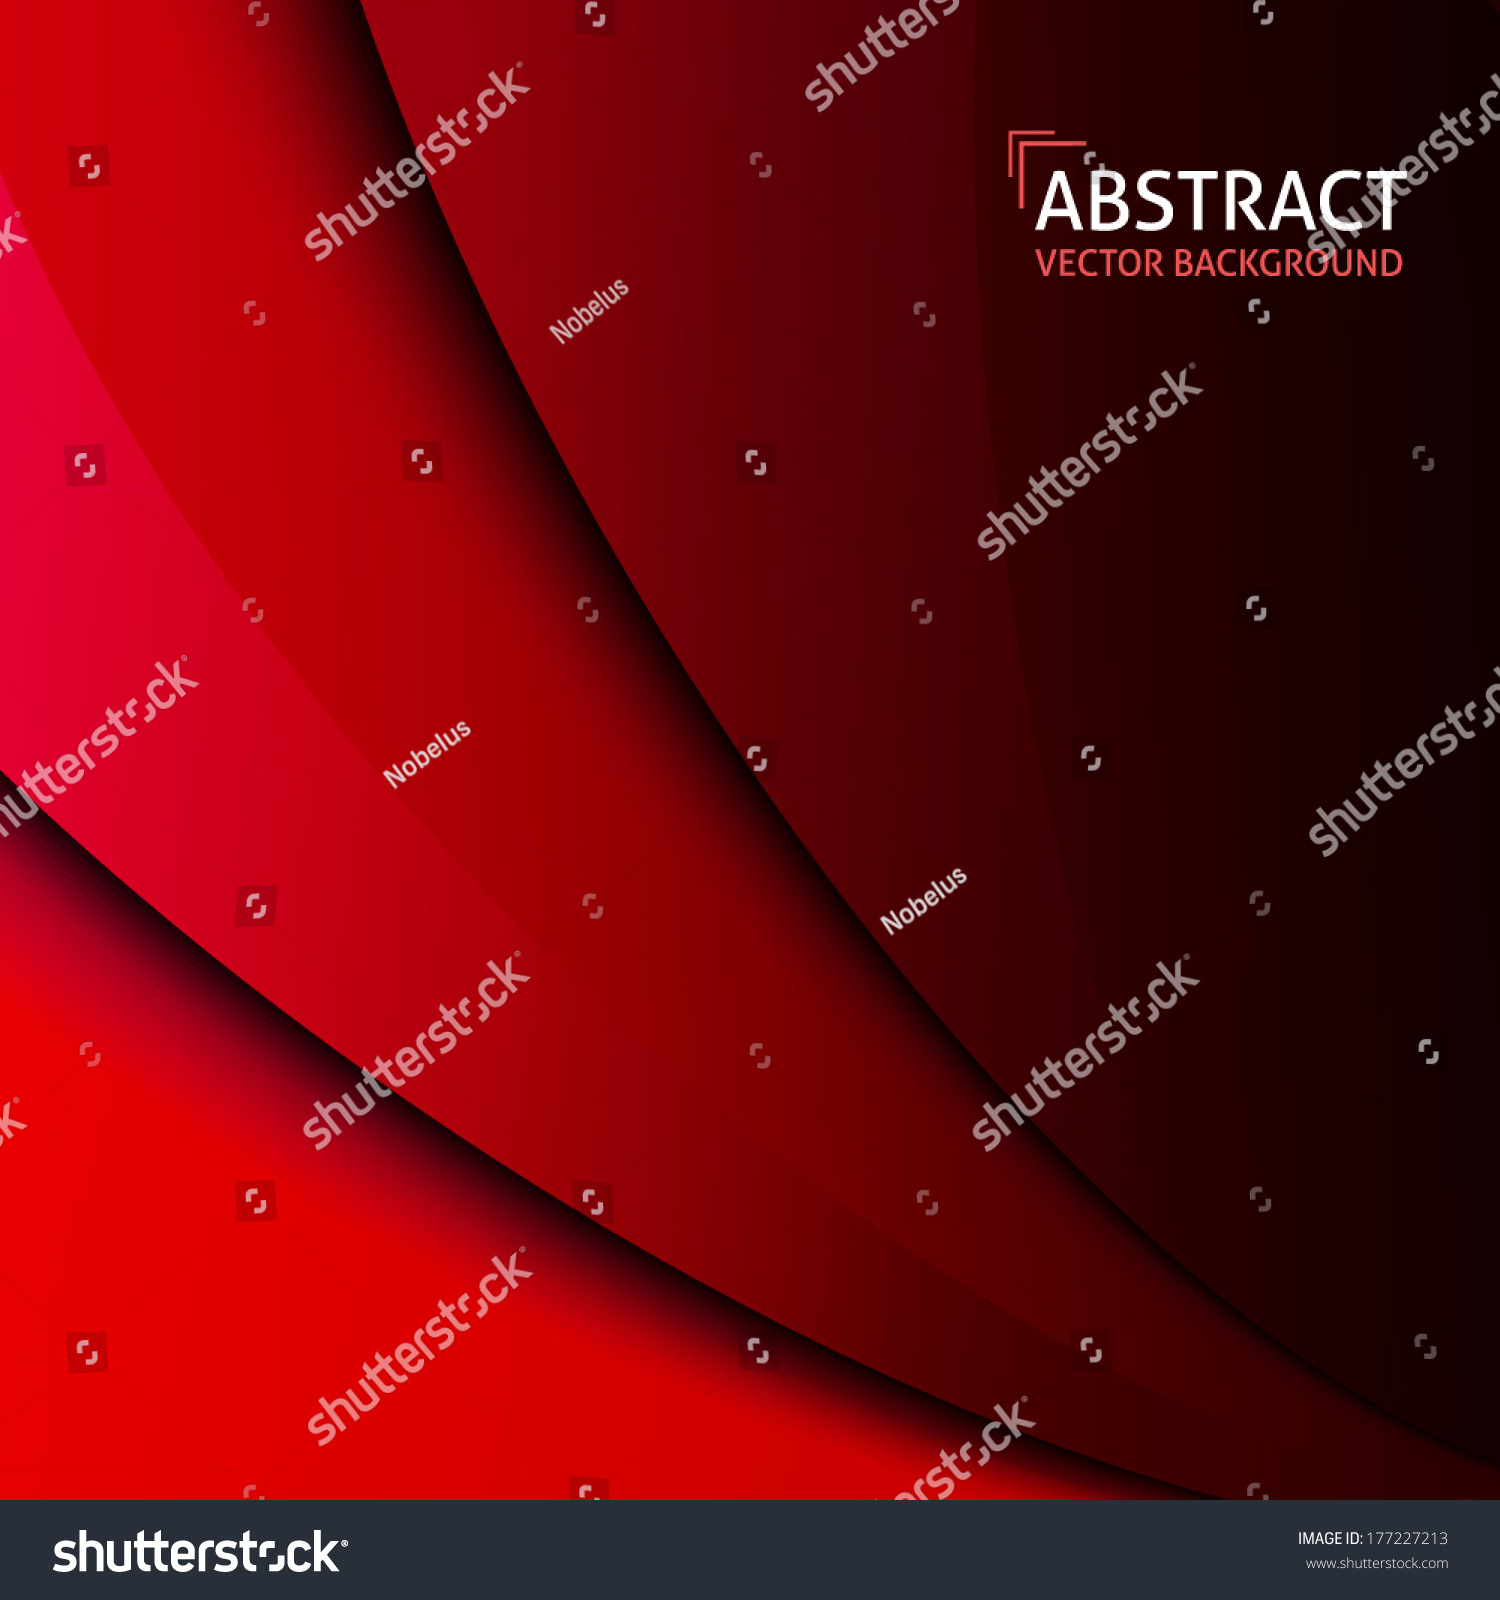 Abstract Background With Red Paper Layers Rgb Eps 10 Vector